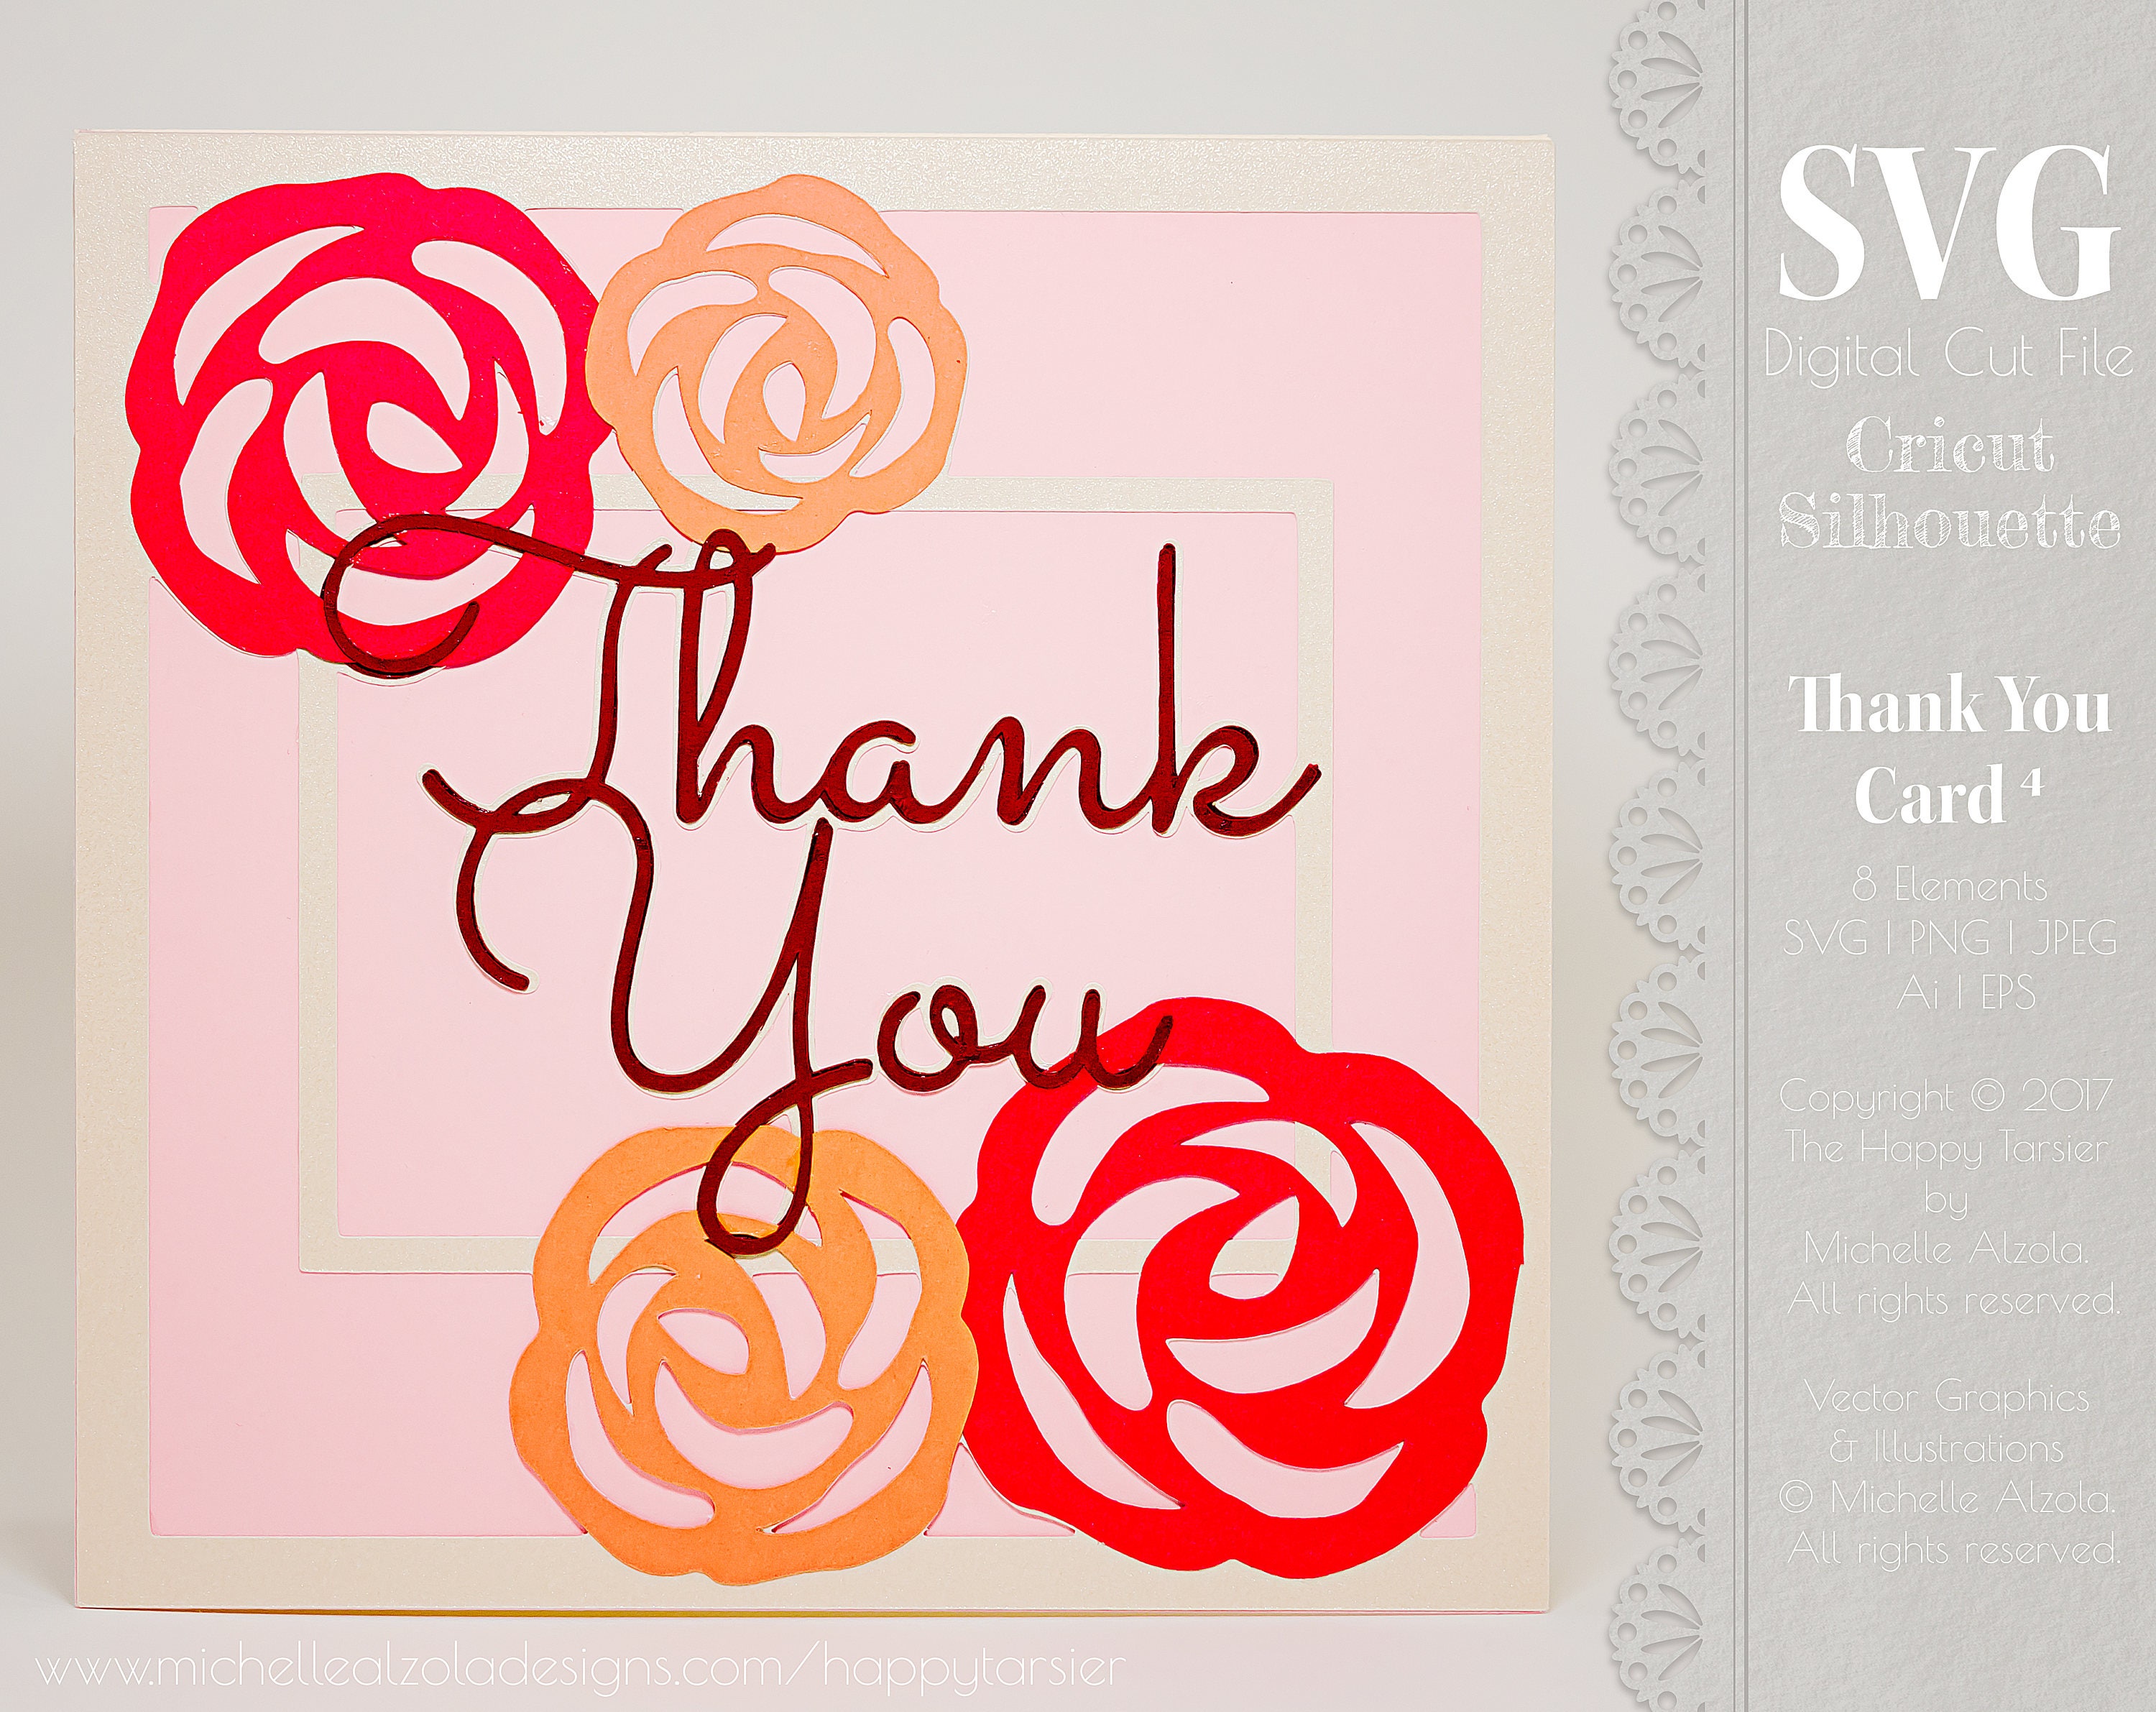 Download Svg Thank You Card Digital Template Greeting Card Cut File